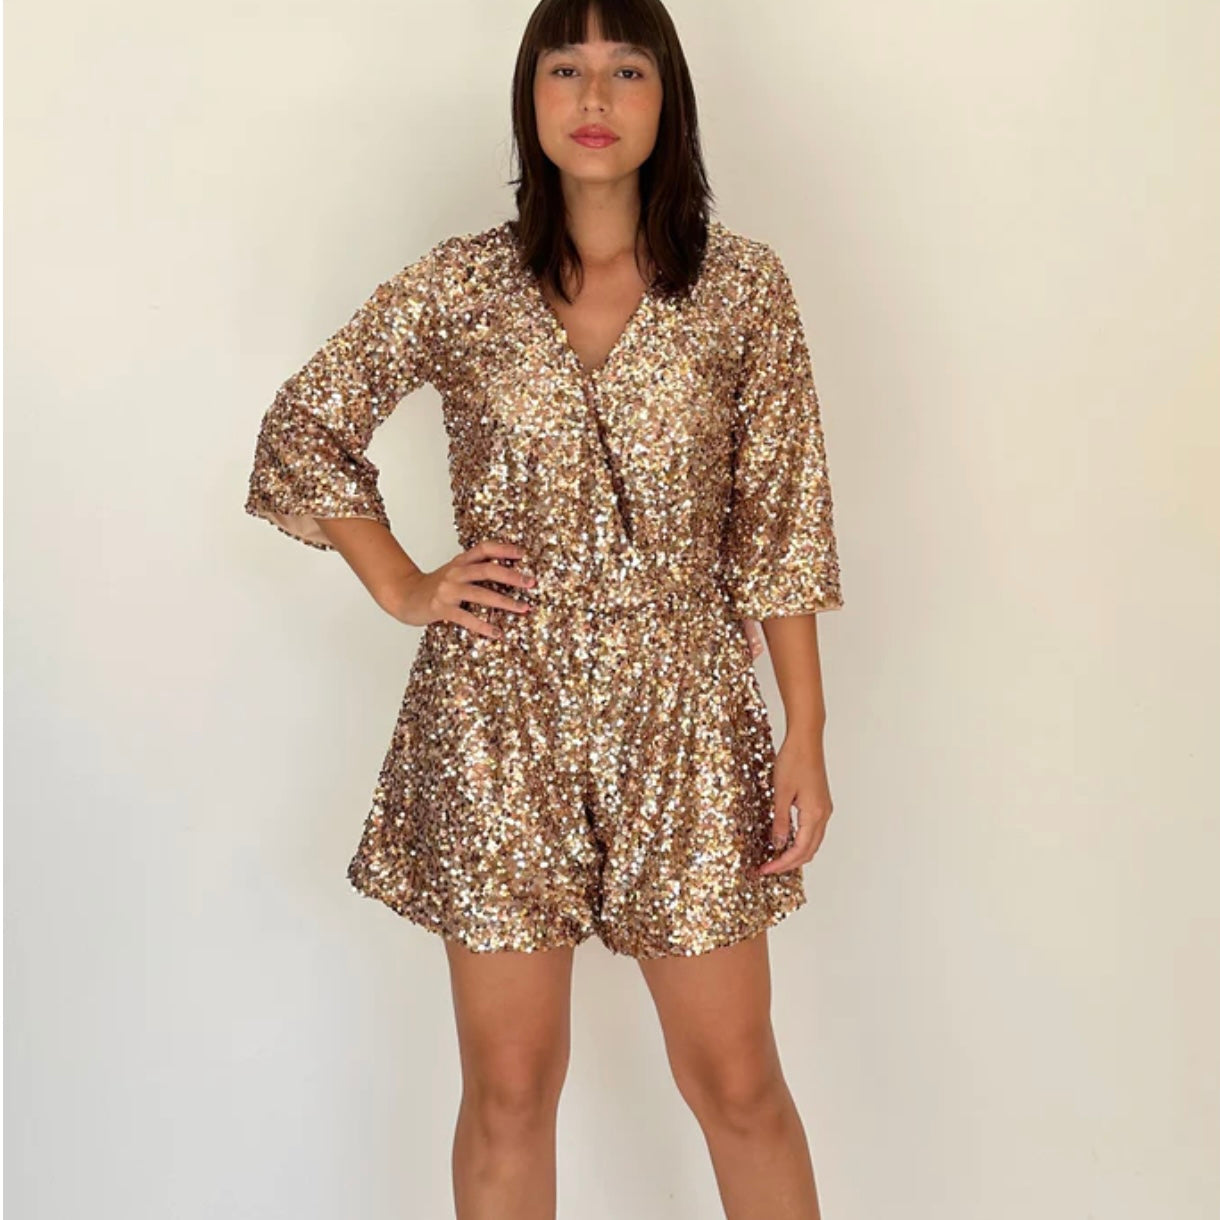 ROMPER LENTEJUELAS GOLD AND SILVER